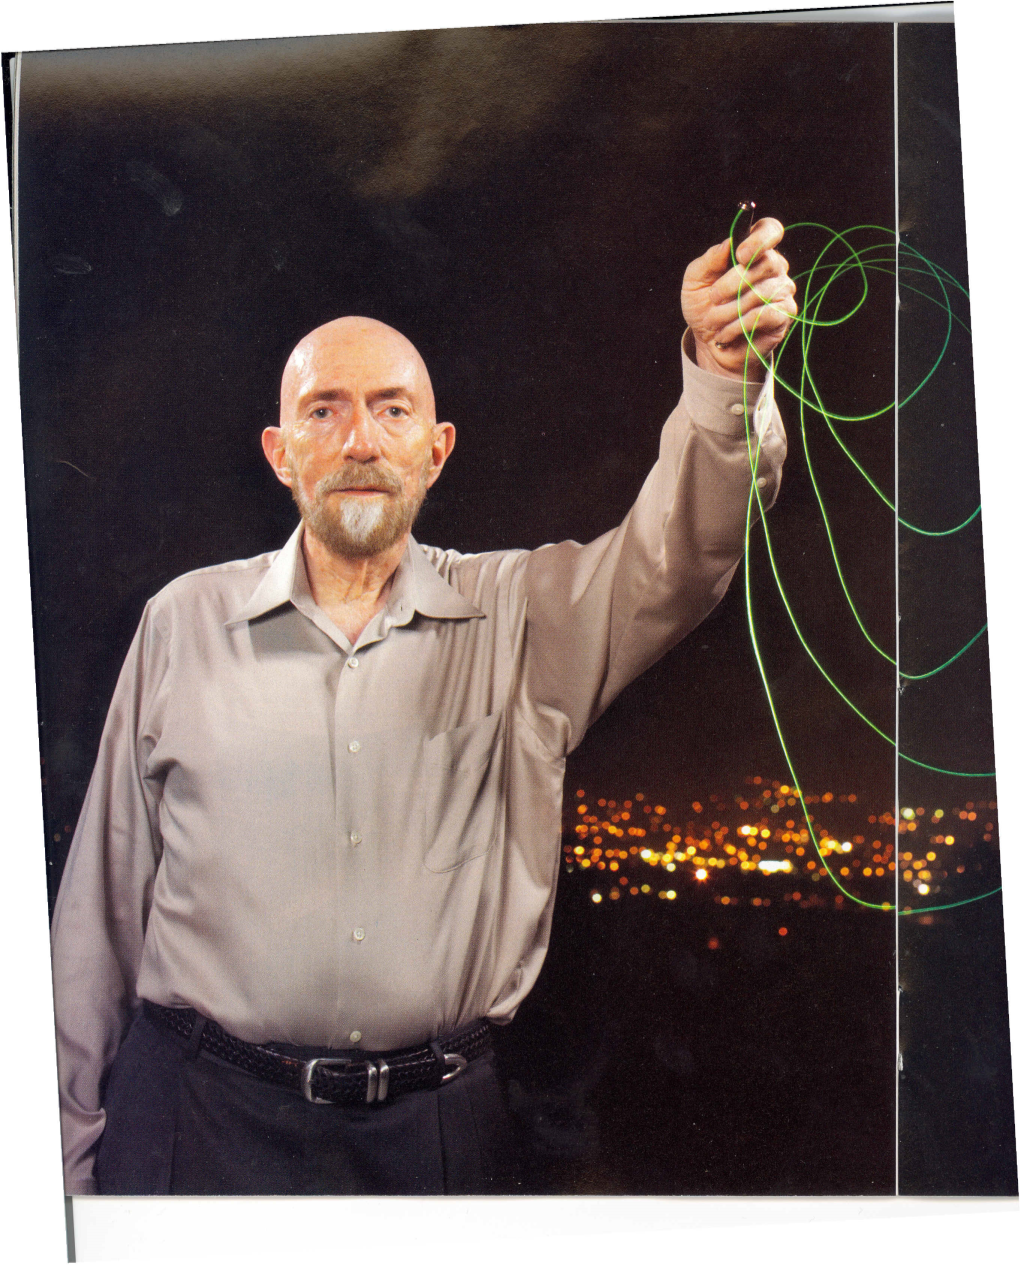 The Discover Interview Kip Thorne